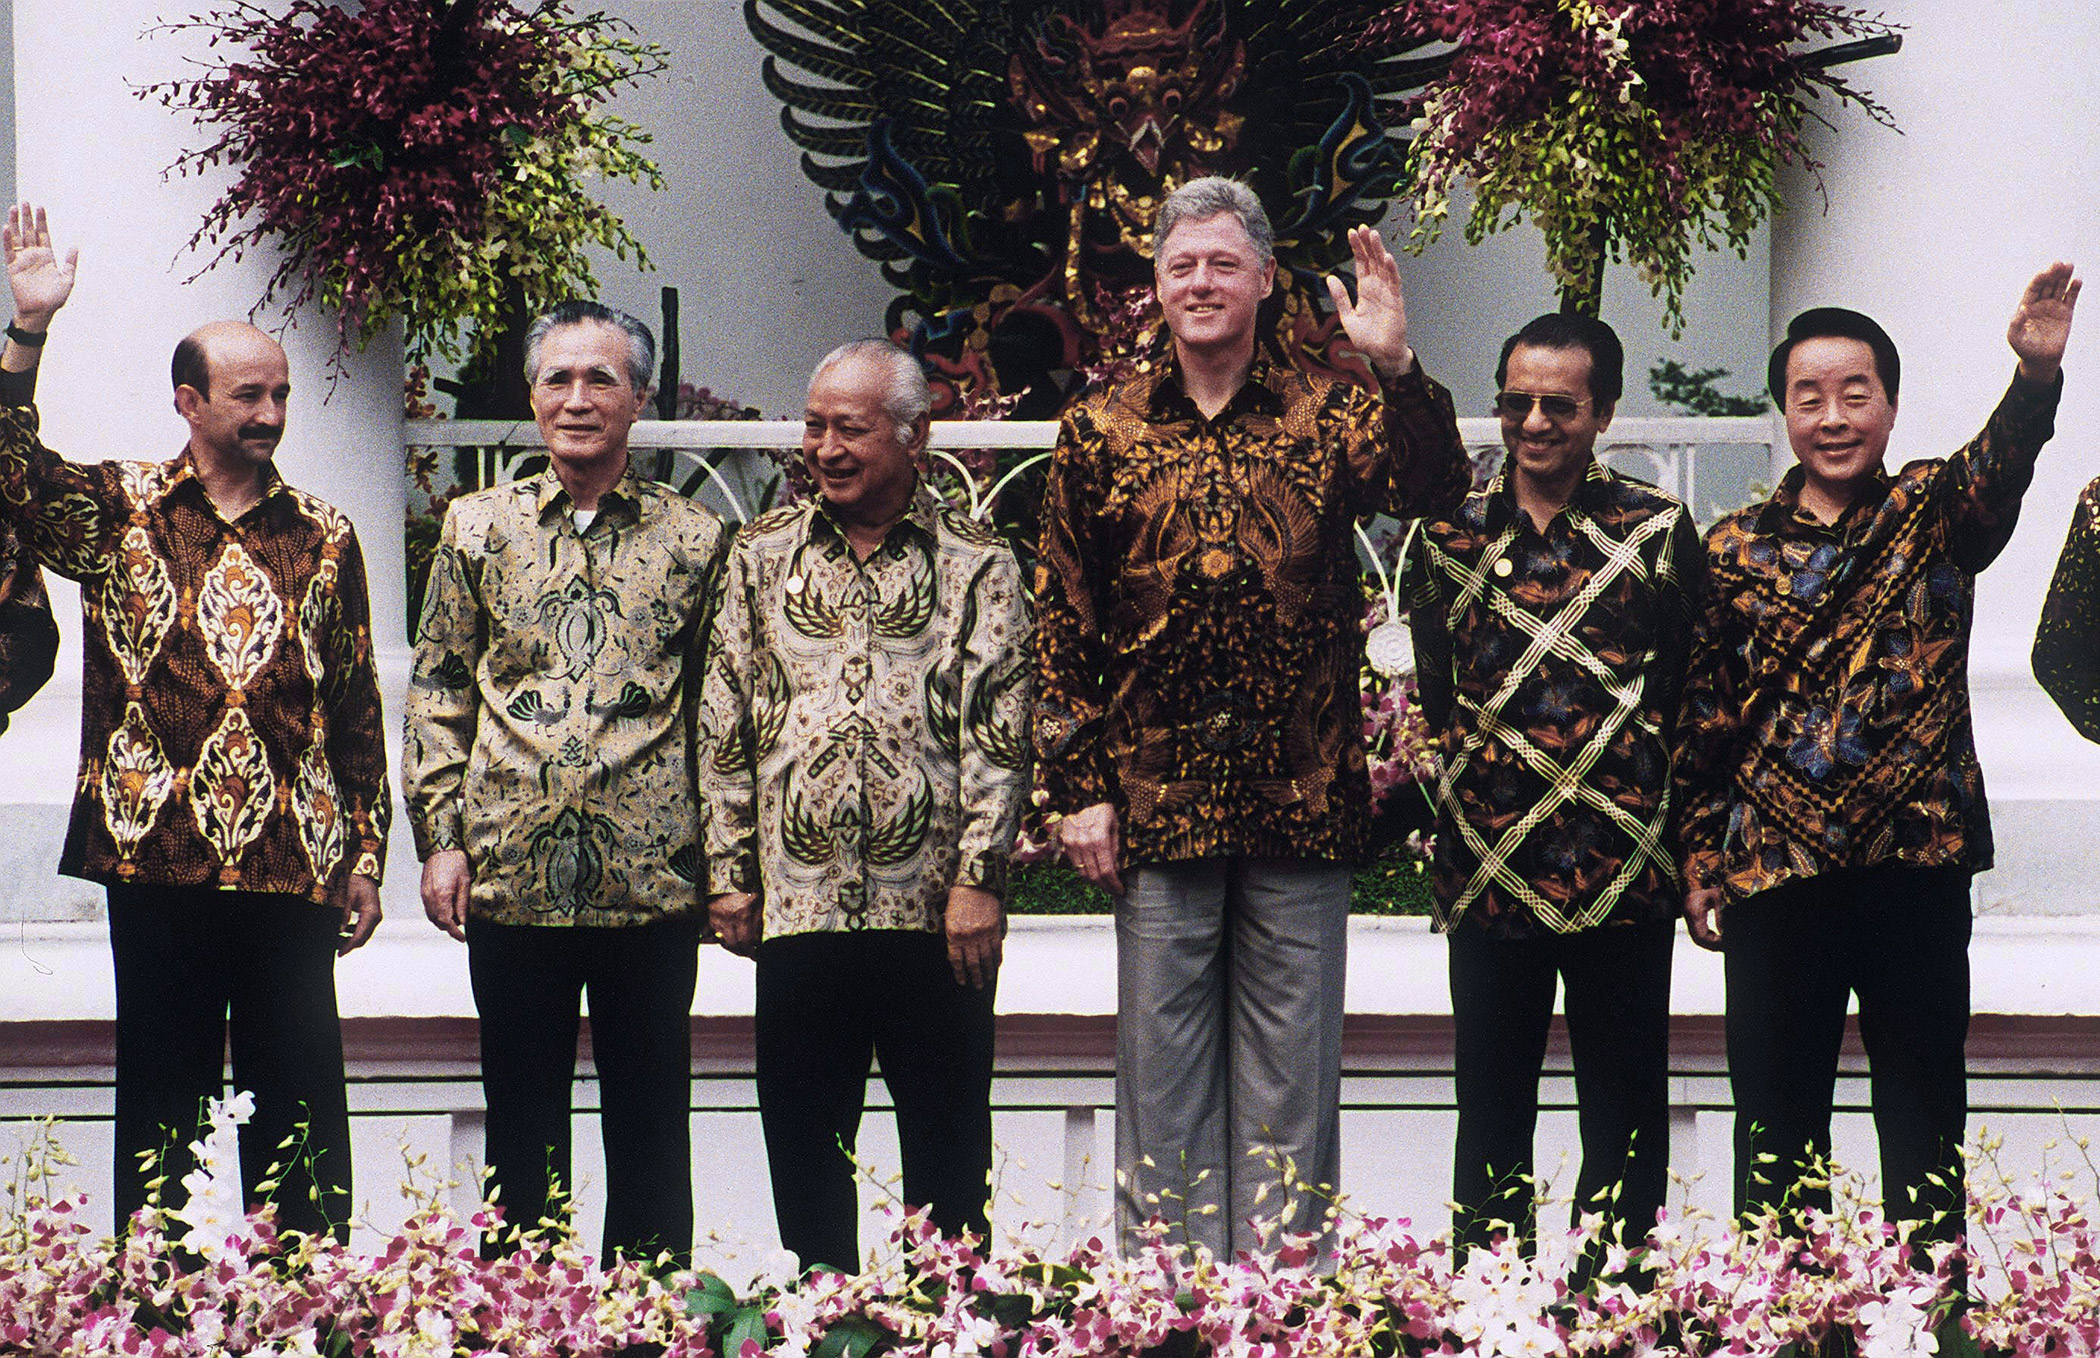 Asia-Pacific Economic Cooperation (APEC) Summit host and Indonesian president, Suharto, center left, poses with Mexican President Carlos Salinas, from left, Japanese Prime Minister Tomiichi Murayama, U.S. President Bill Clinton, Malaysian Prime Minister Mahathir Mohamad and South Korean President Kim Young-Sam during a group photo in Bogar, Indonesia, on Nov. 16, 1994. AFP PHOTO/Toru YAMANAKA (Photo credit should read TORU YAMANAKA/AFP/Getty Images)